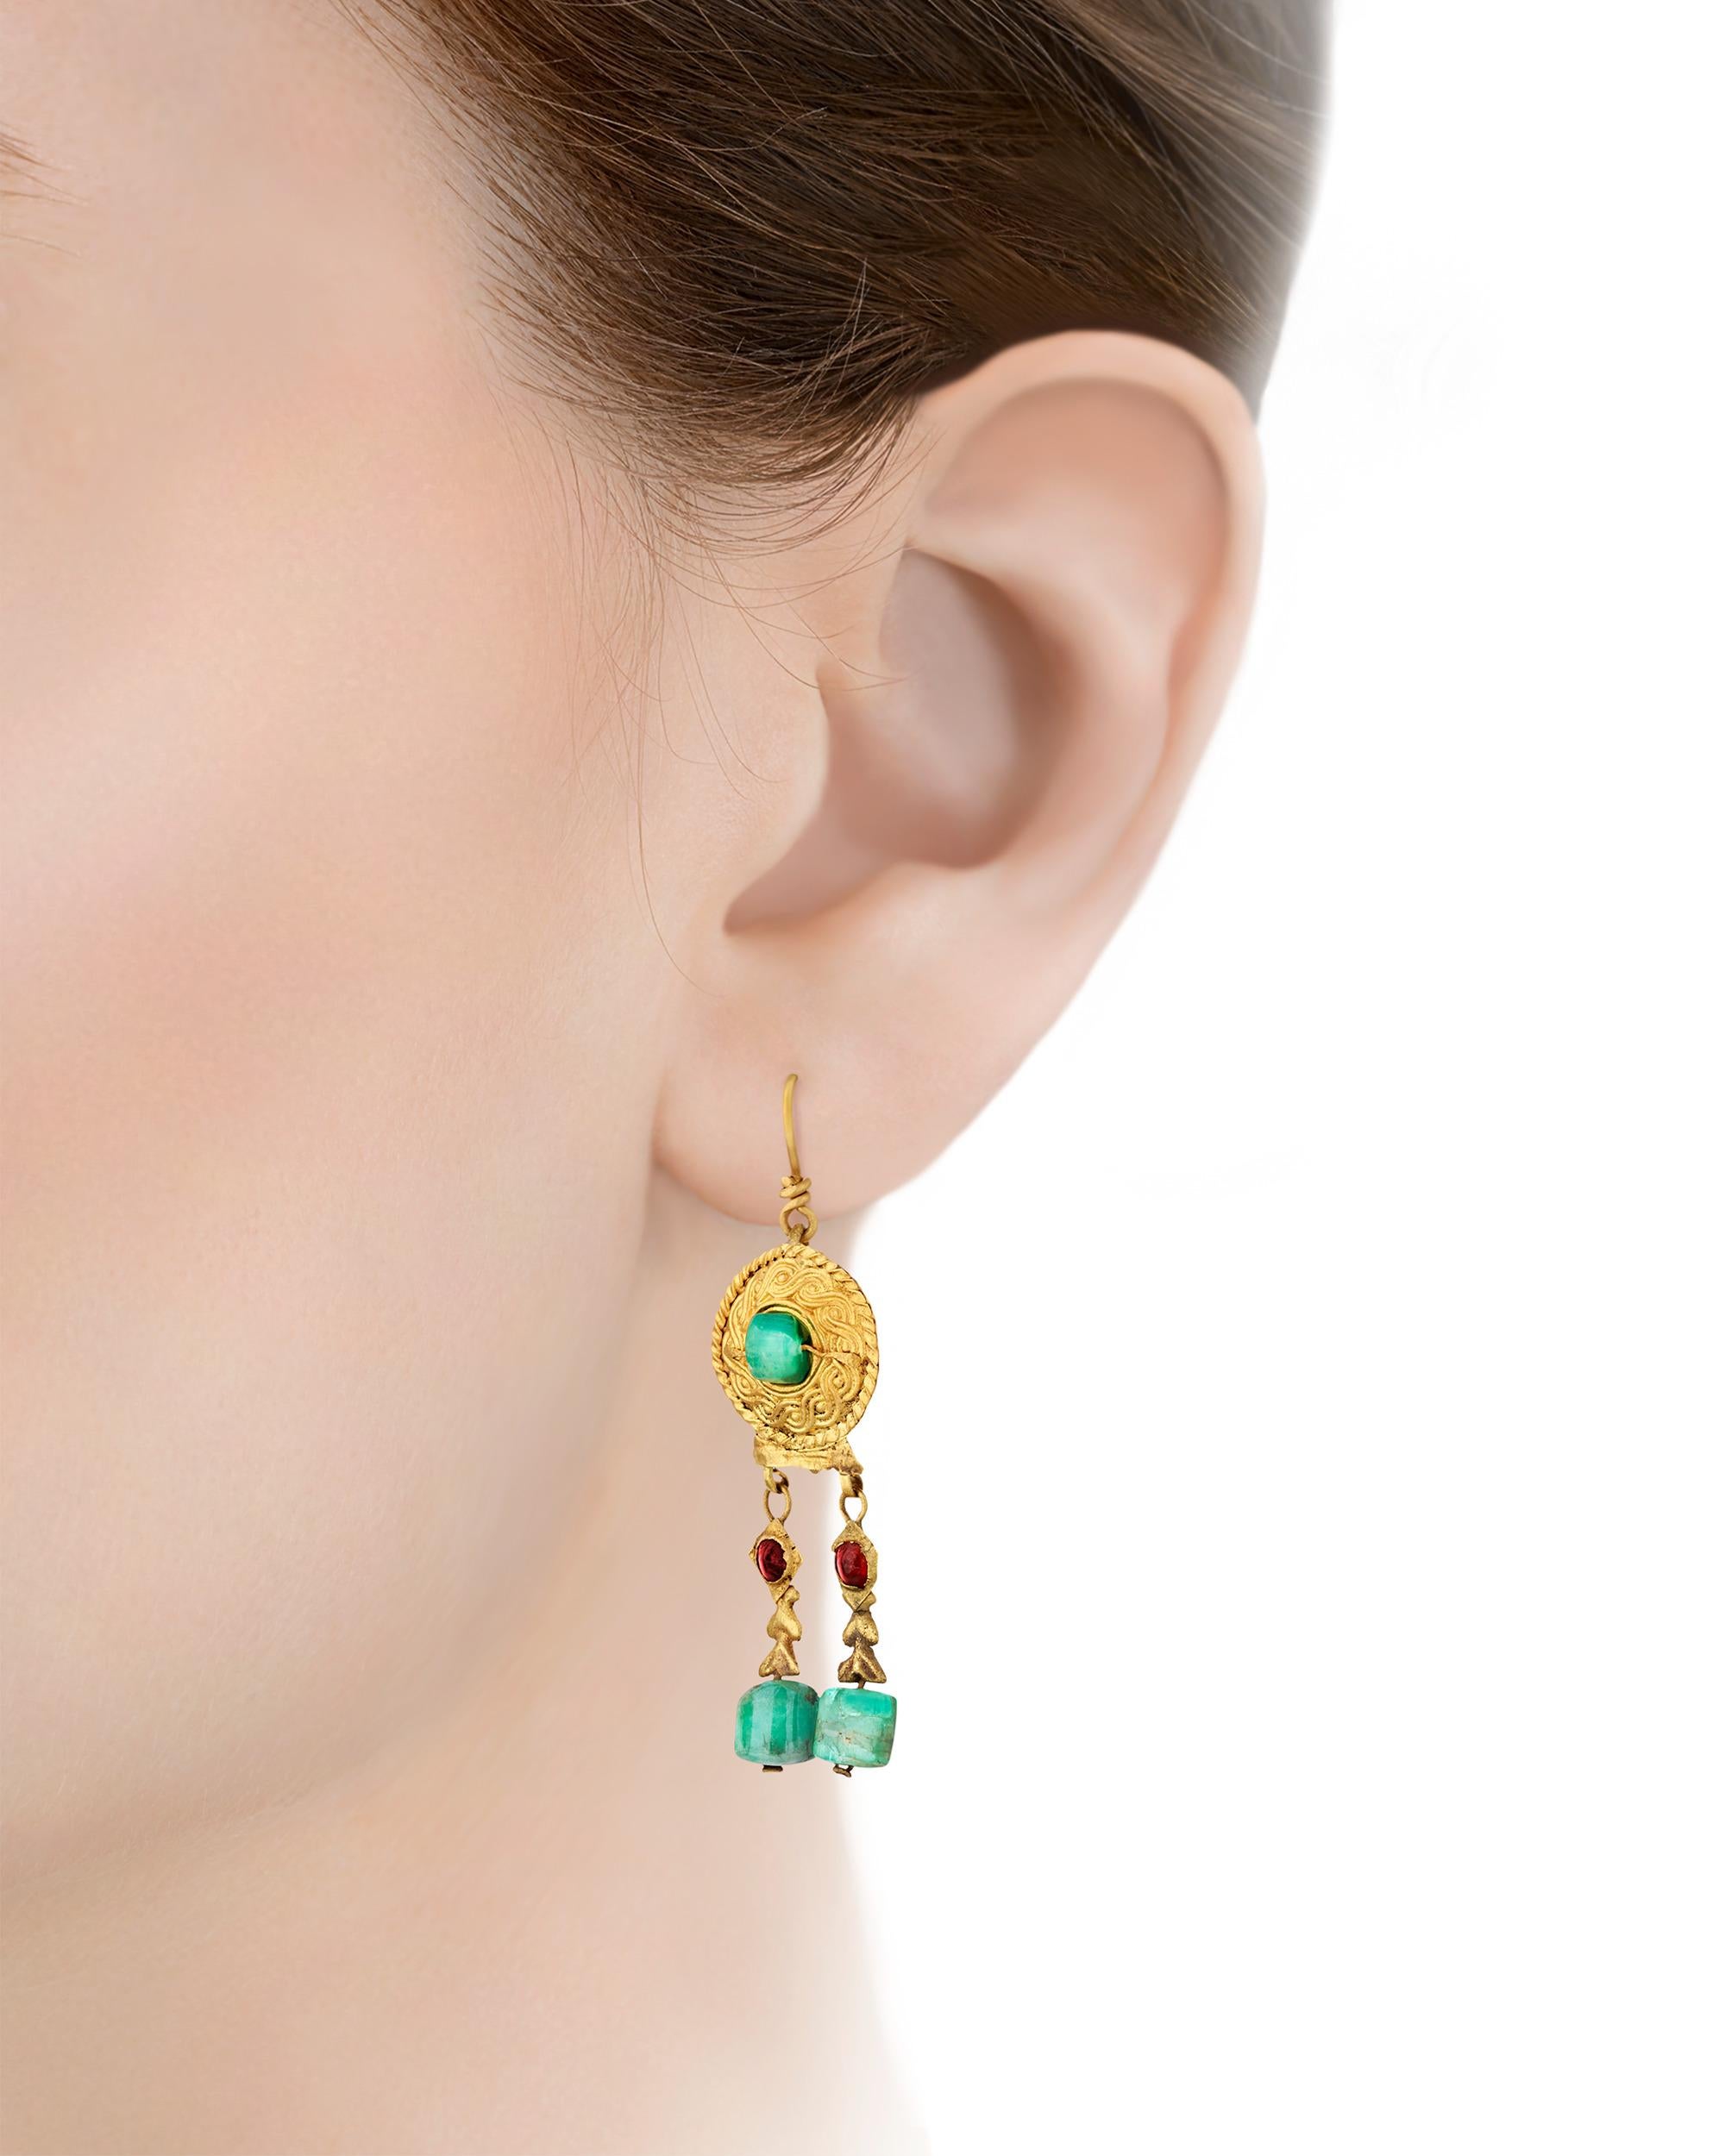 Exuding the grandeur of late antiquity, this pair of garnet and emerald earrings hails from the illustrious Byzantine Empire. The classic drop earrings feature four exquisite green emeralds — one on each shield and two that form the denouement of